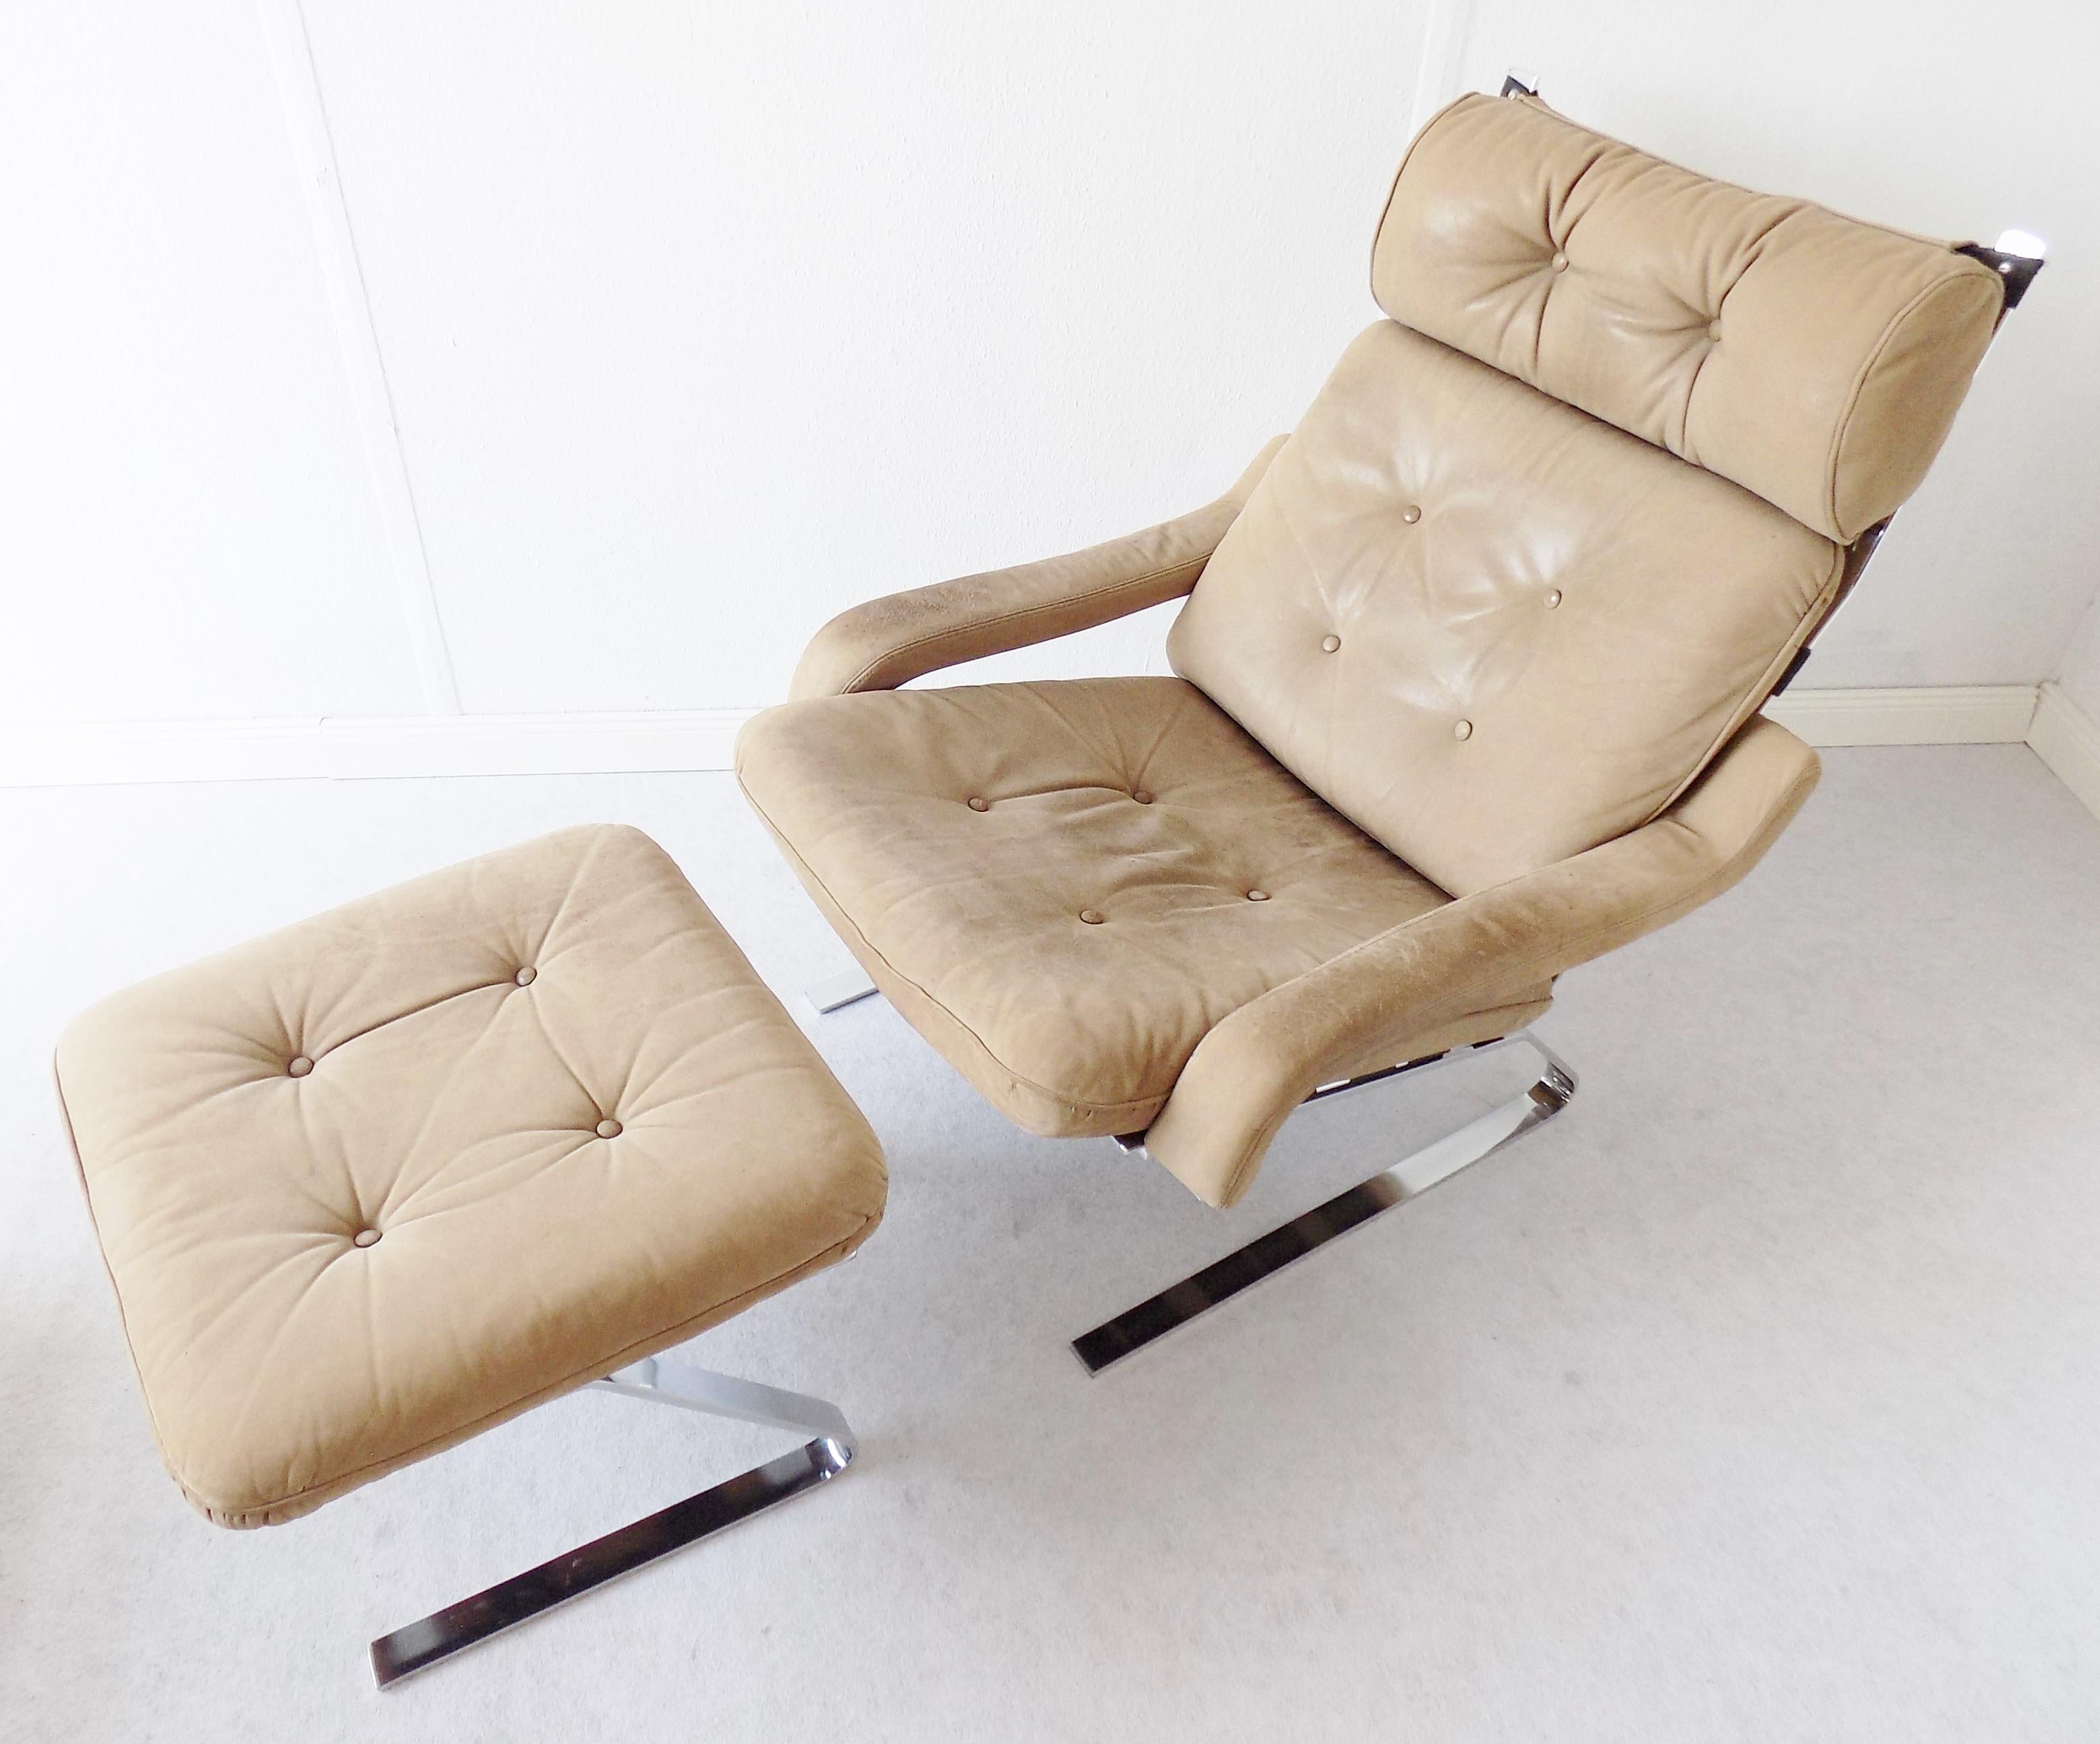 Danish Swing Lounge Chair with ottoman, Nubuk leather, Mid-Century modern, Chrom

Danish Swing Lounge Chair with ottoman, made in light beige Nubuk. The chair is in good condition and swings nicely on the steel rockers. The leather shows light